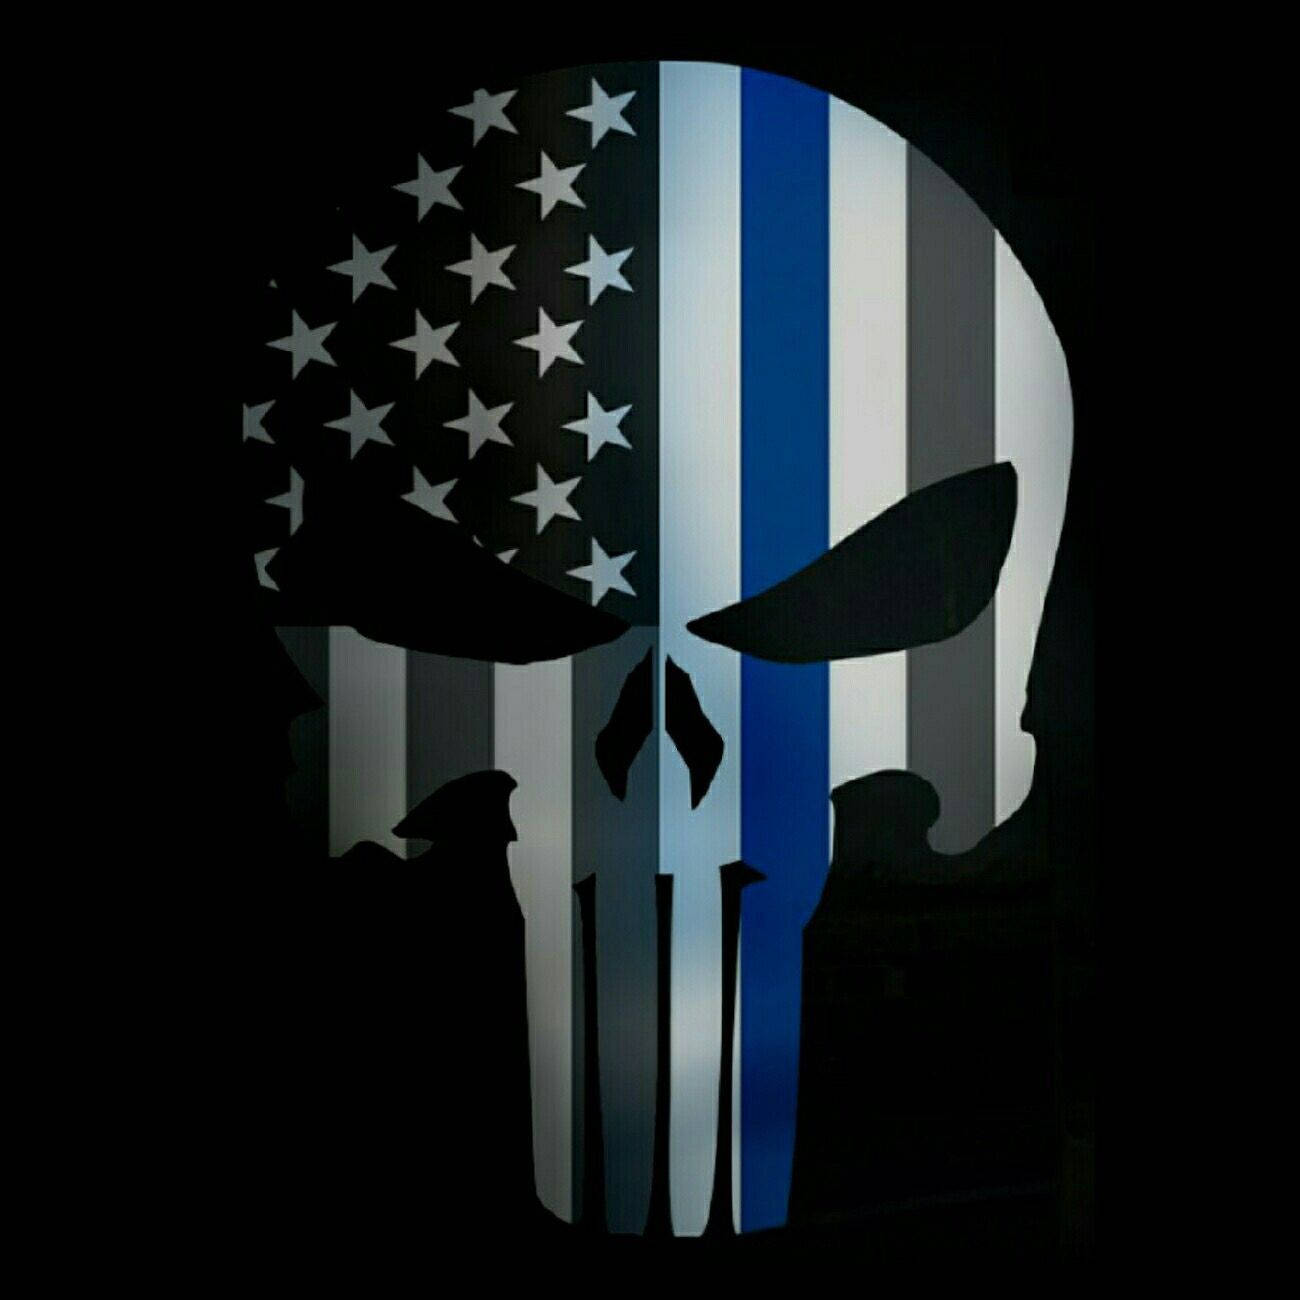 Show your support for the Thin Blue Line with this Punisher inspired Skull Emblem Wallpaper